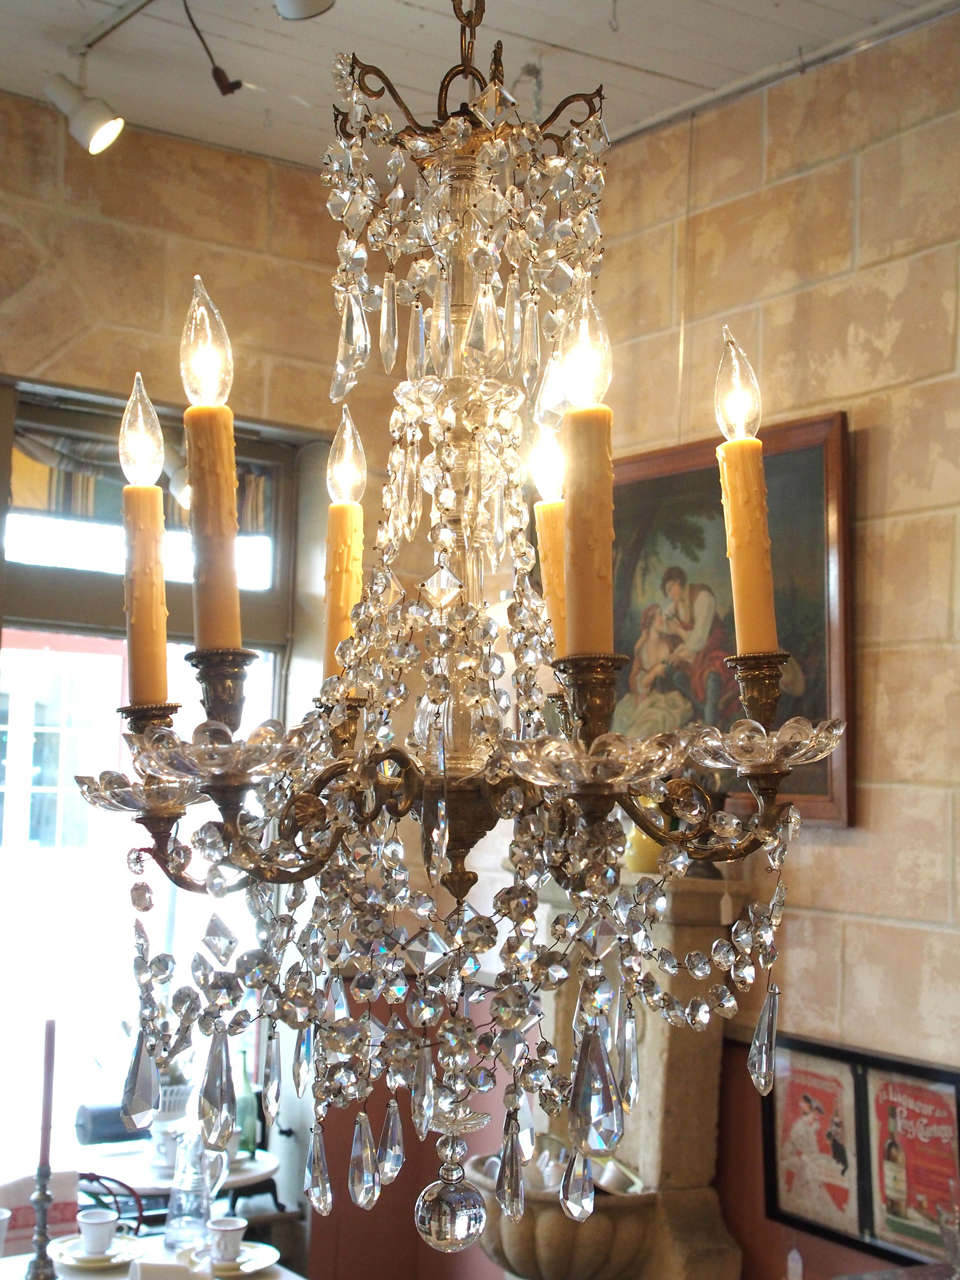 Early 19th century French Restoration period six-light crystal chandelier.